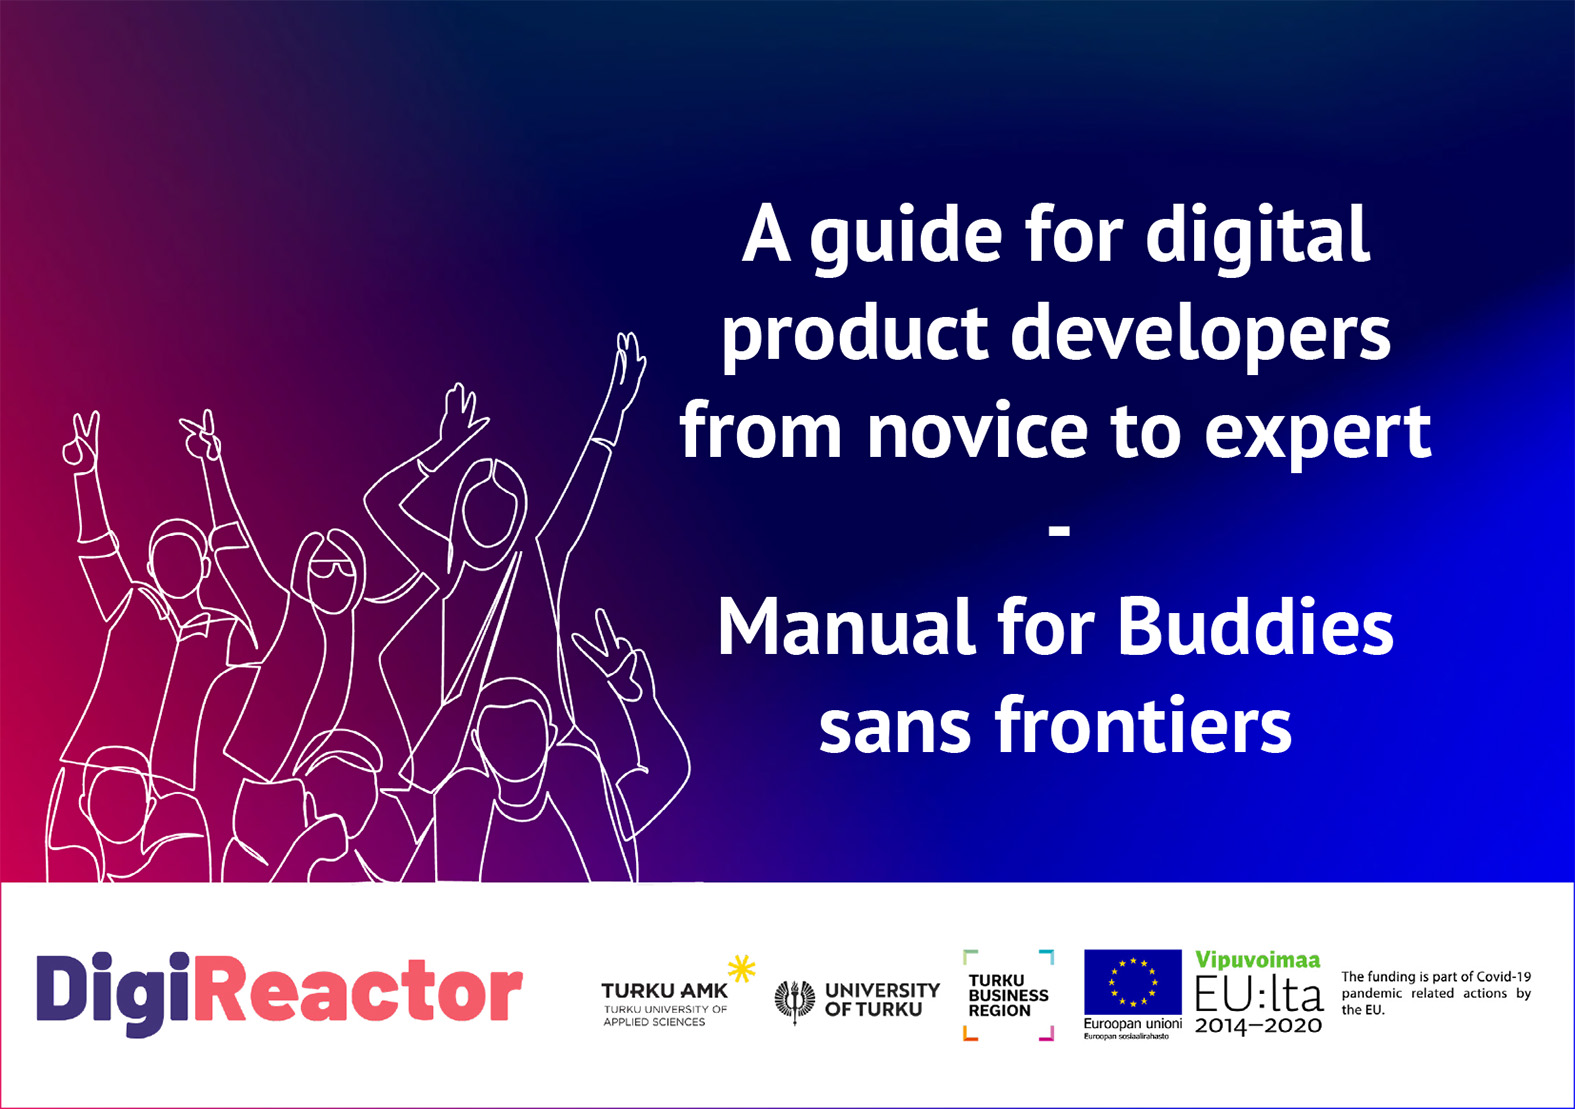 A quide for digital product developers from novice to expert - Manual for Buddies sans frontiers